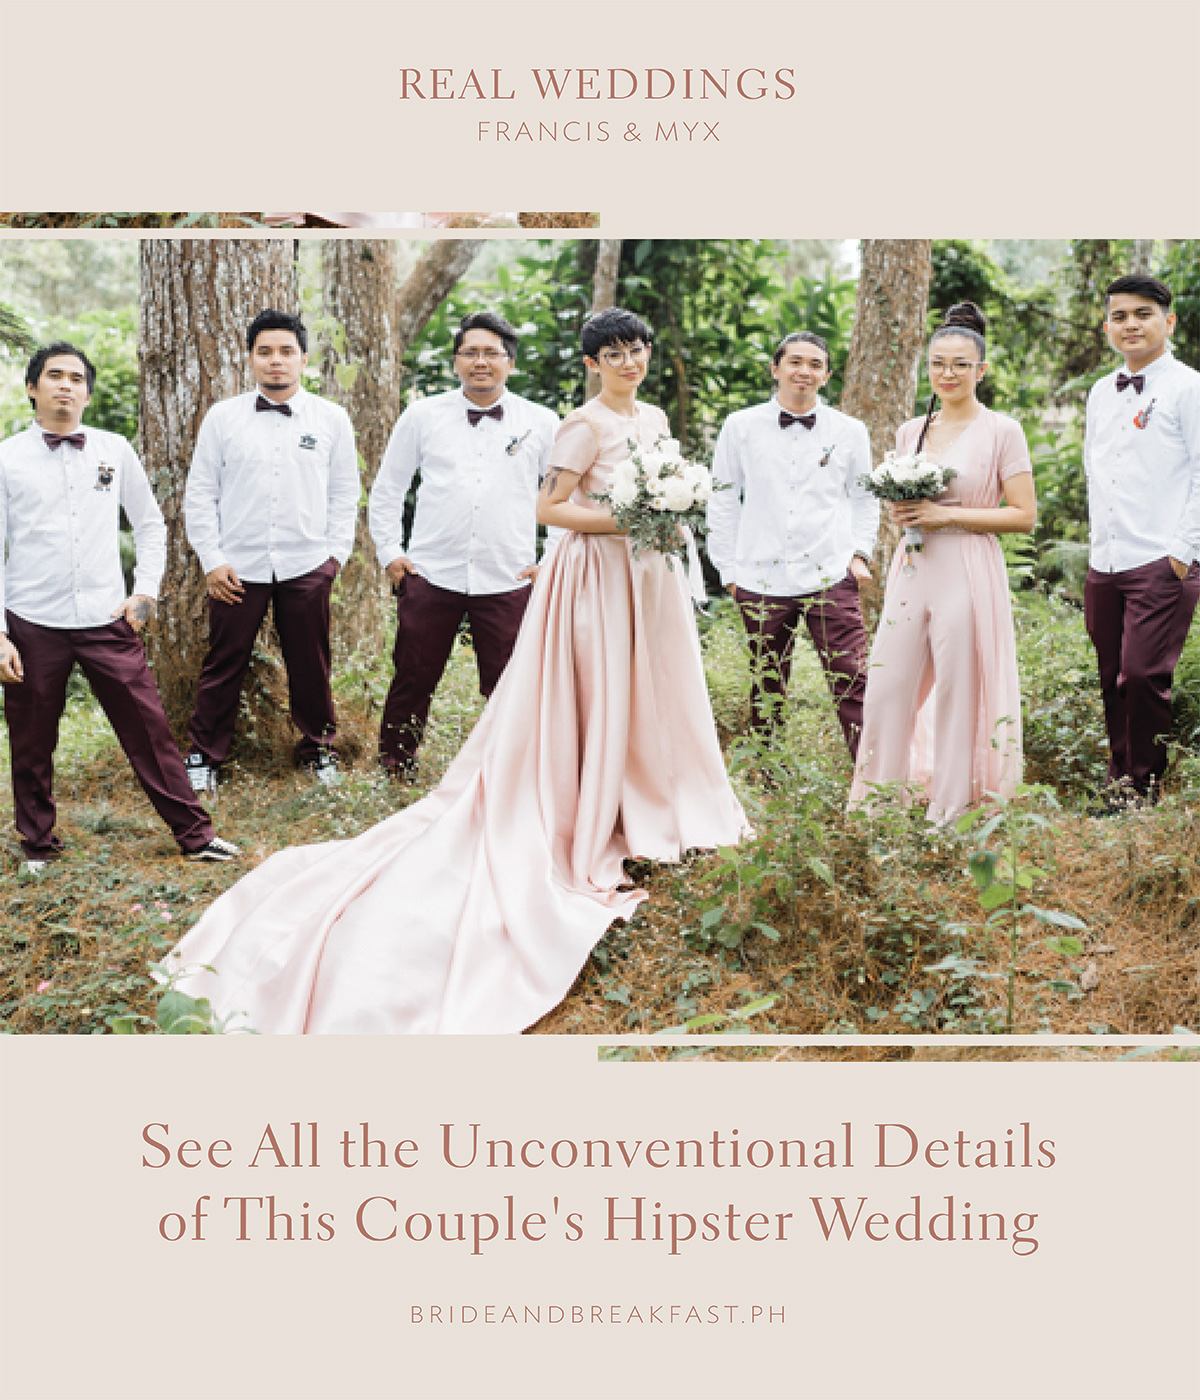 See All the Unconventional Details of This Couple's Hipster Wedding